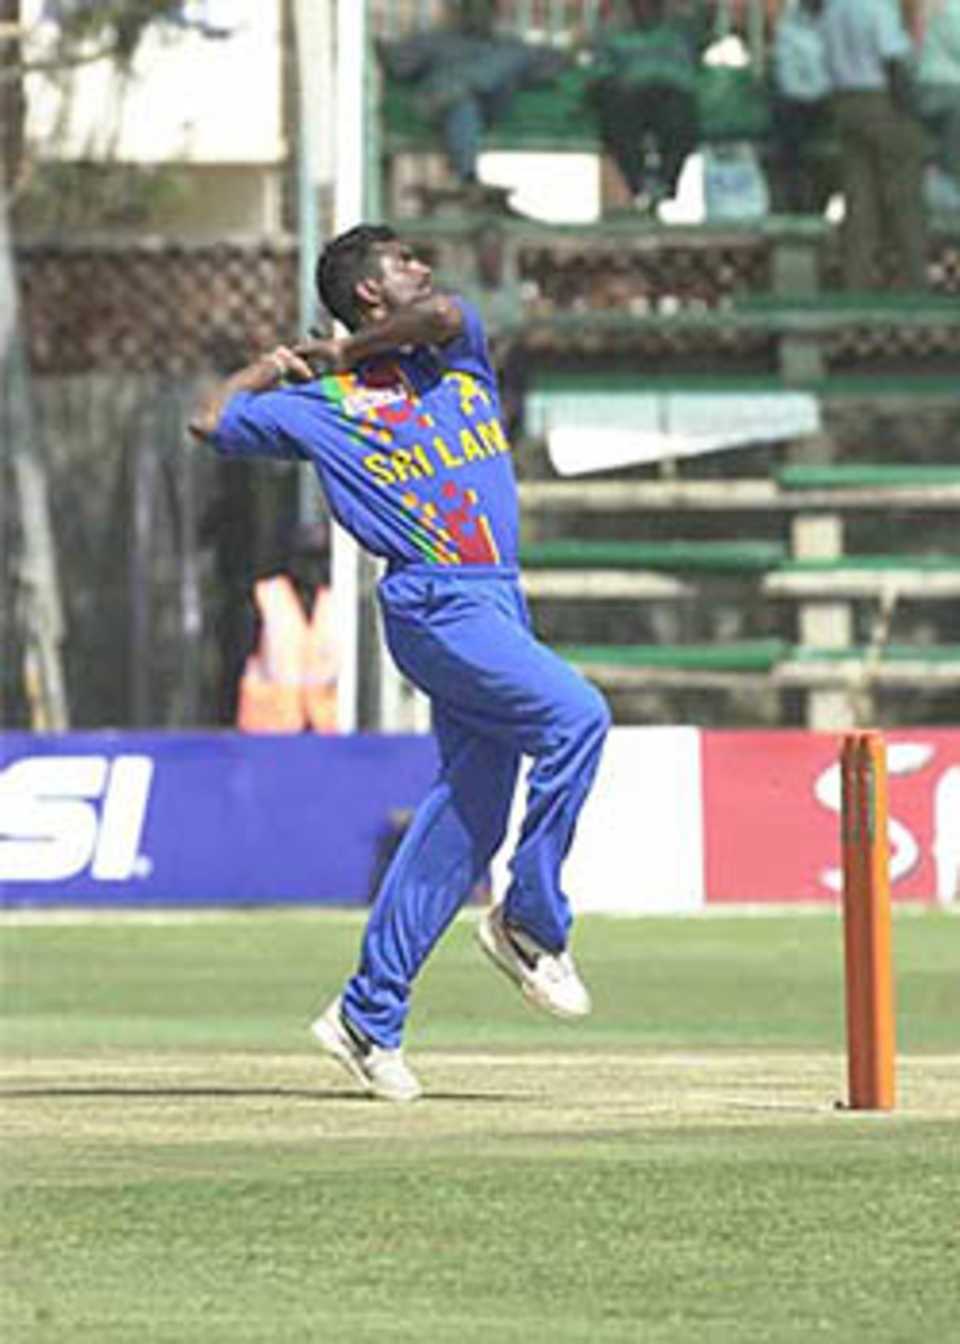 Muralitharan just about to deliver the ball